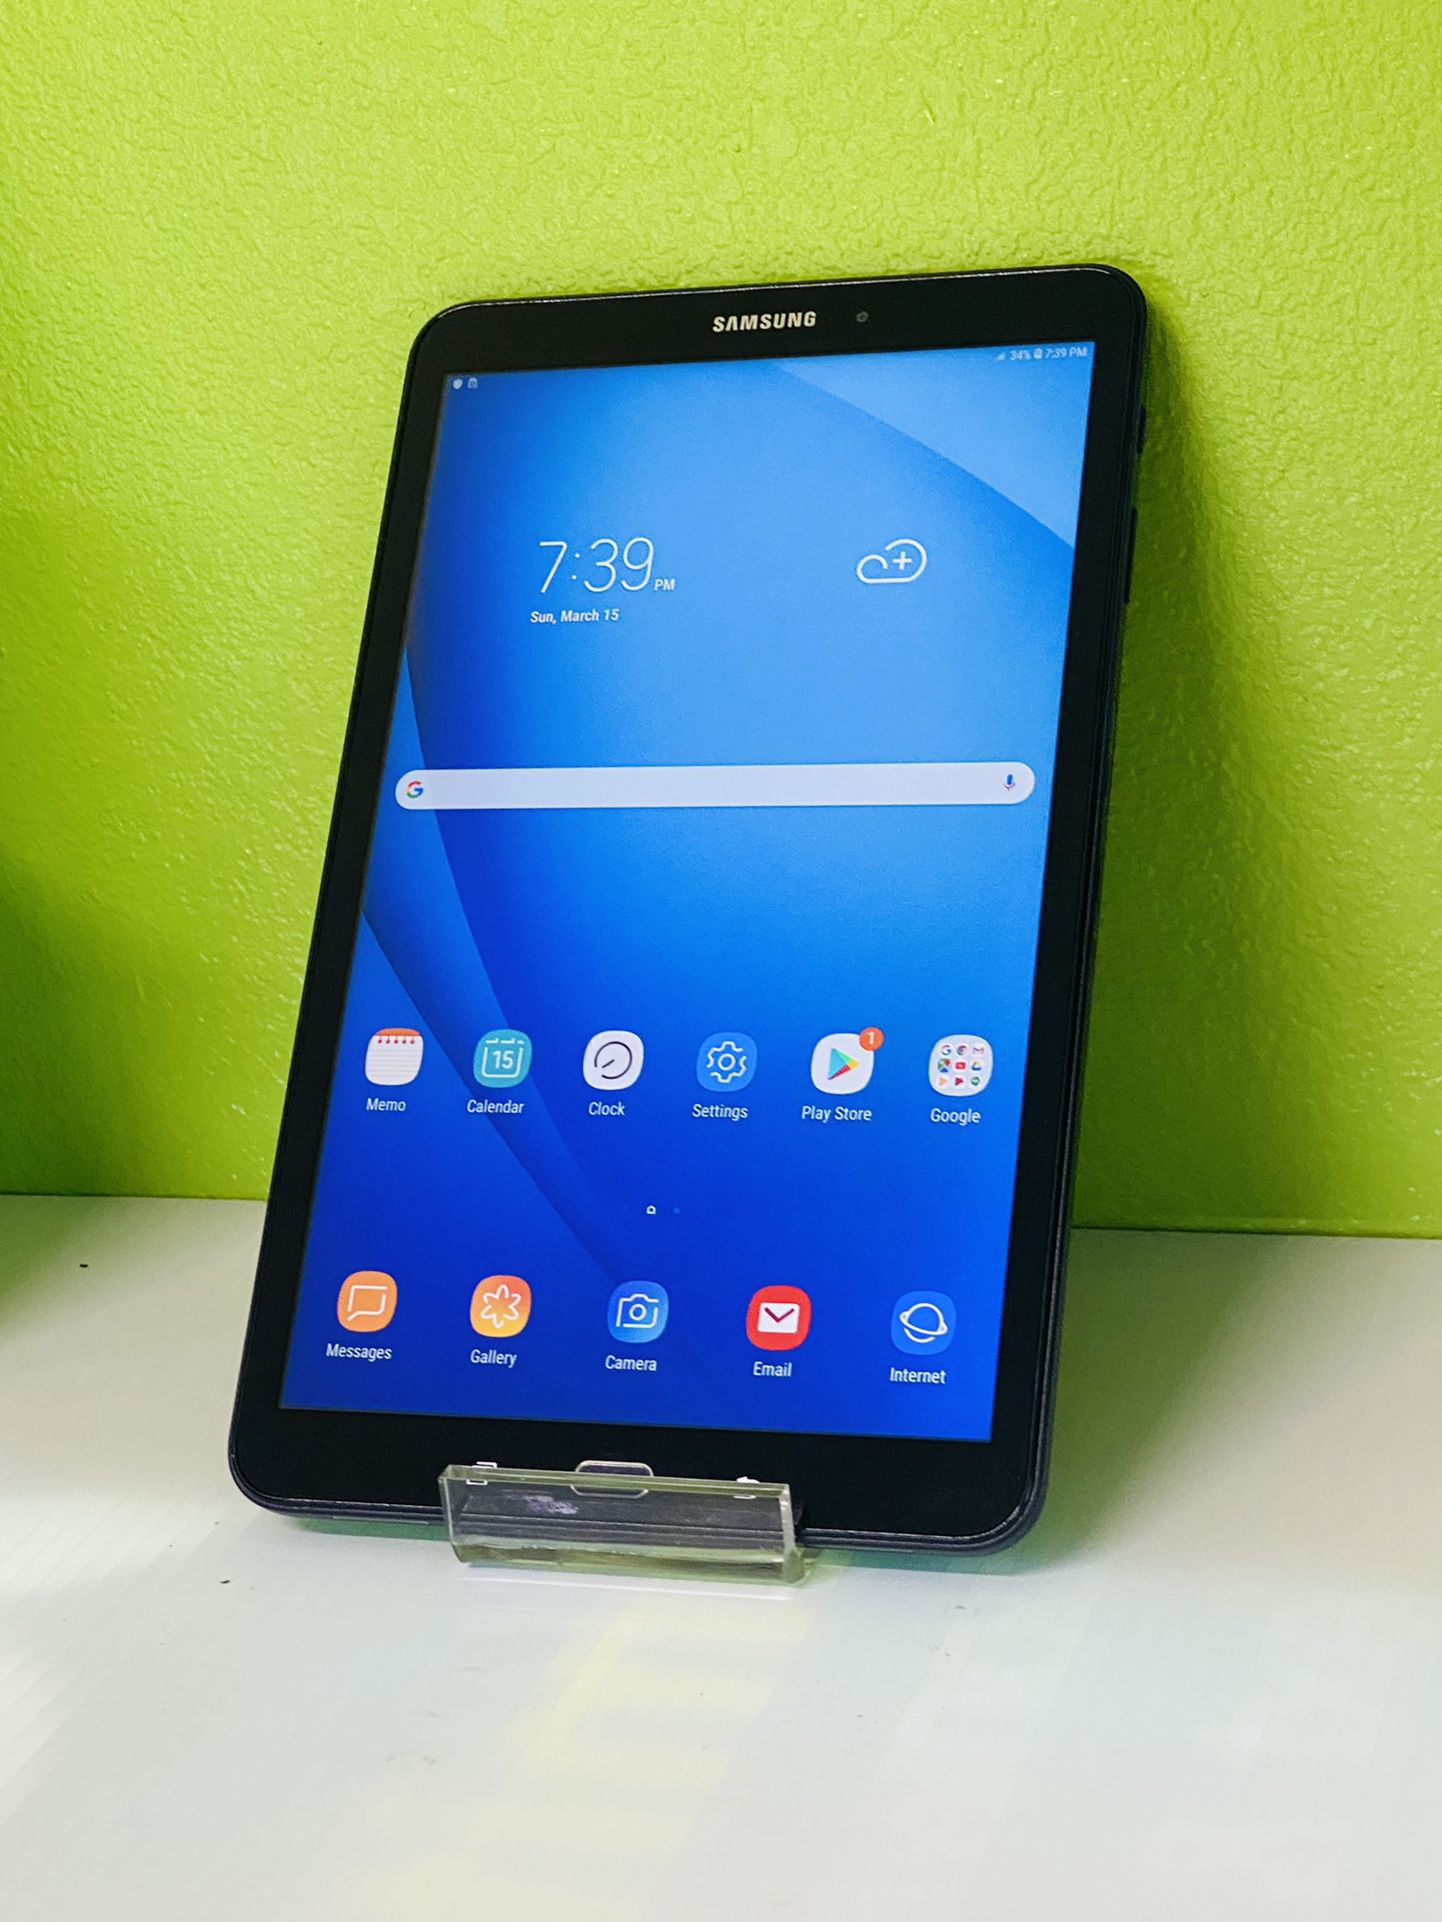 💥SAMSUNG TABLET ON SALE TODAY 💥